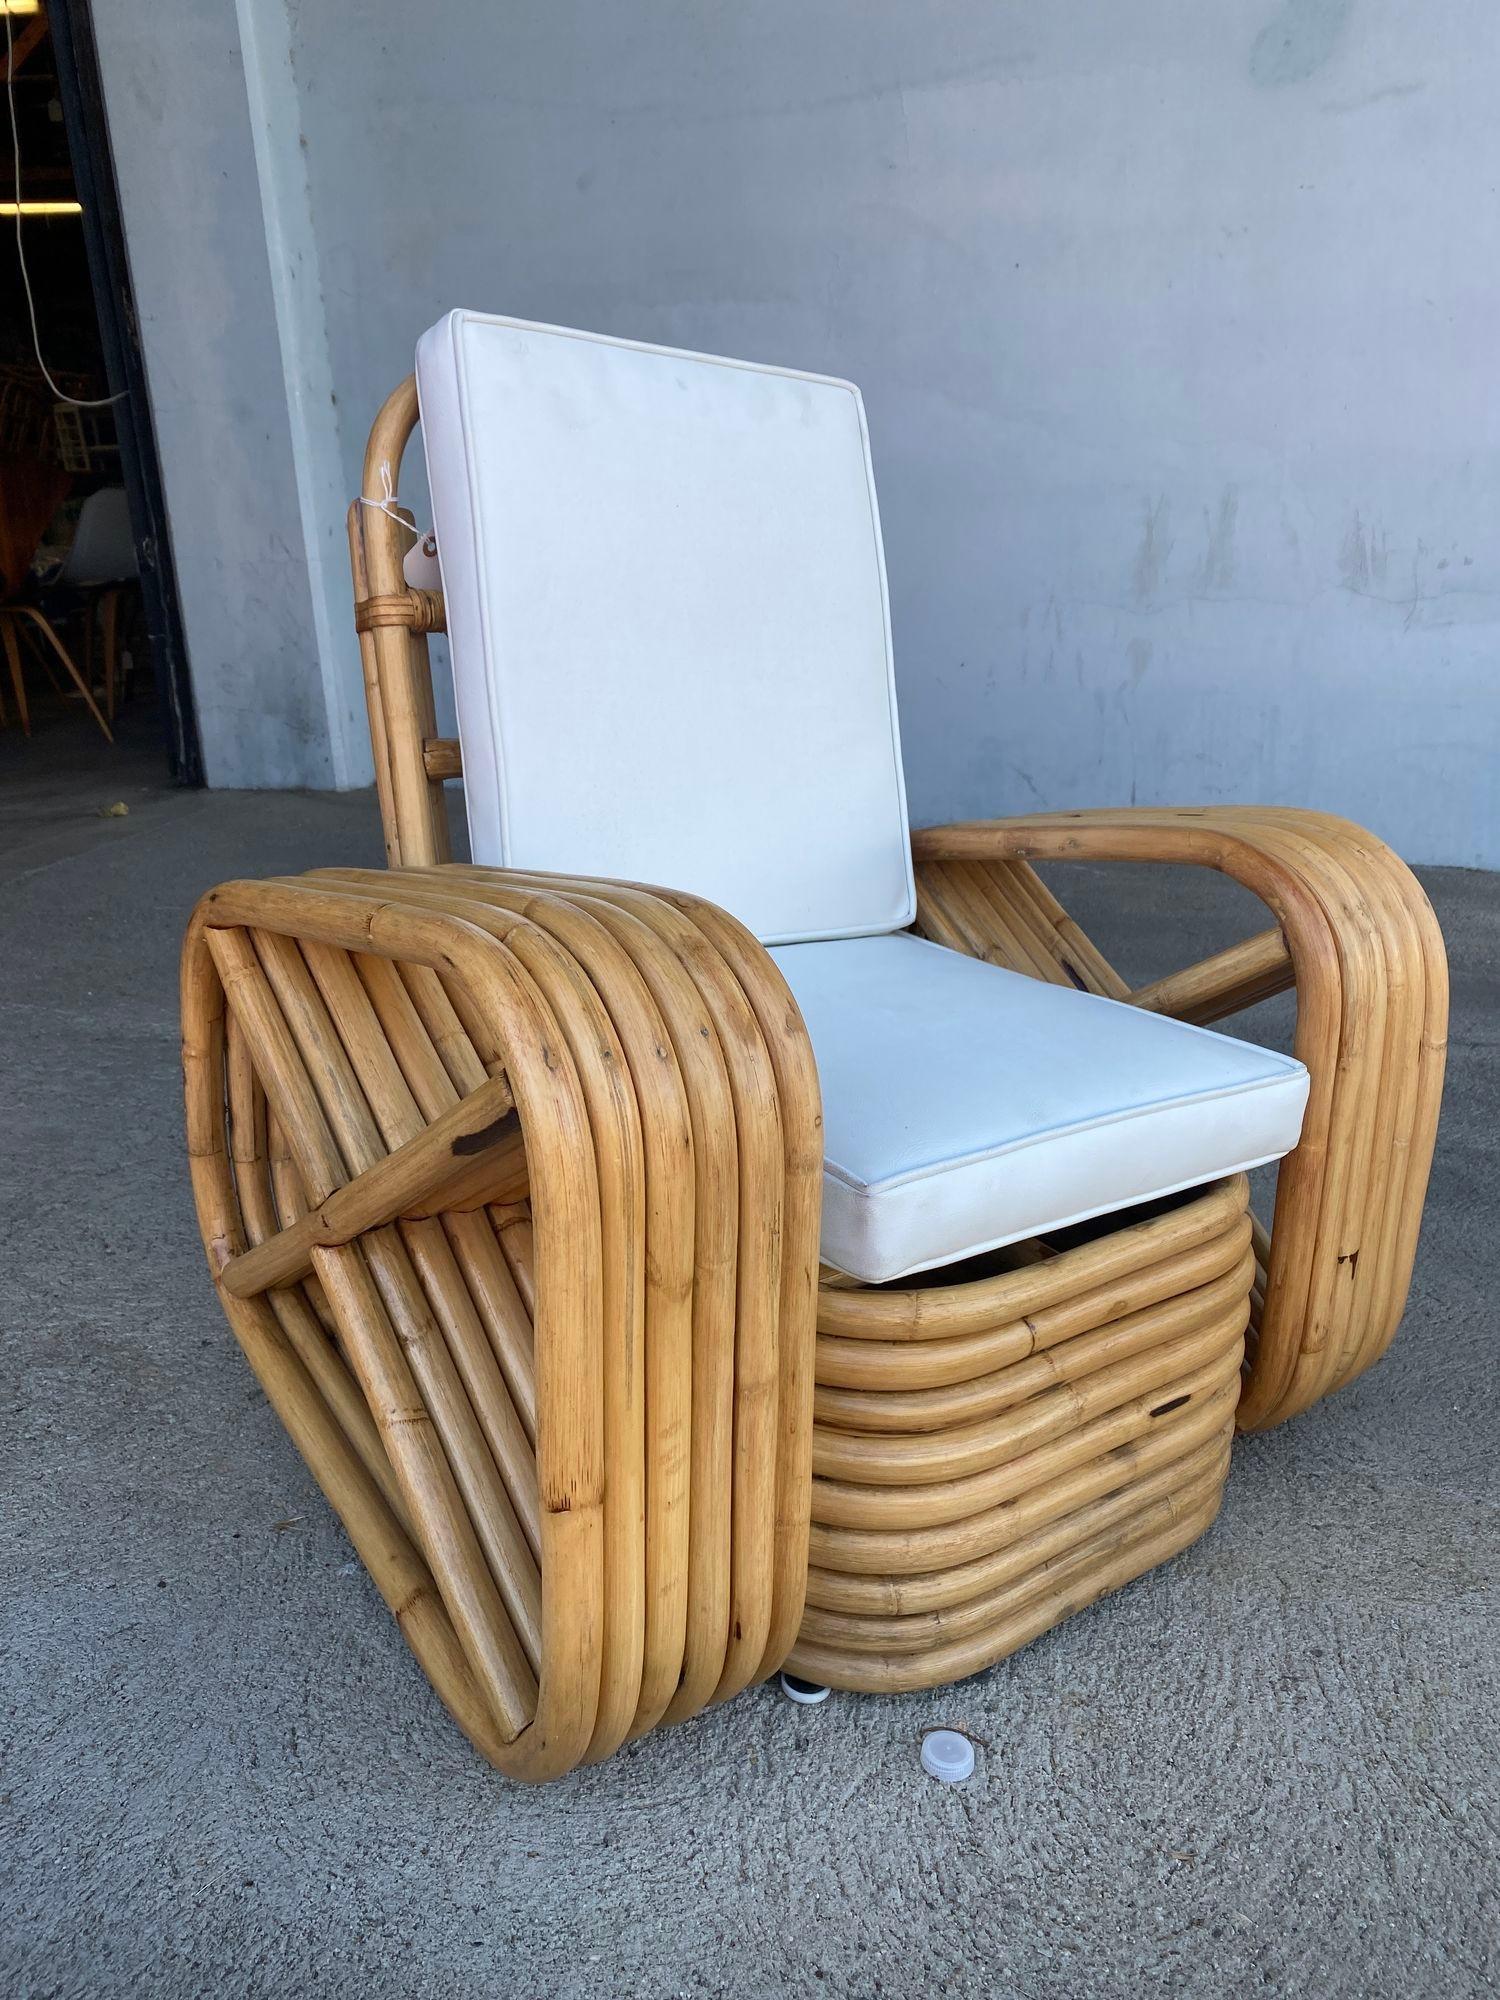 Rare child-size reverse five-strand square pretzel rattan lounge chair featuring reversed square pretzel arms and an over stacked height rattan base. In this set, you get a set of 2 chairs.

Restored new for you

Tropical Sun Rattan was started